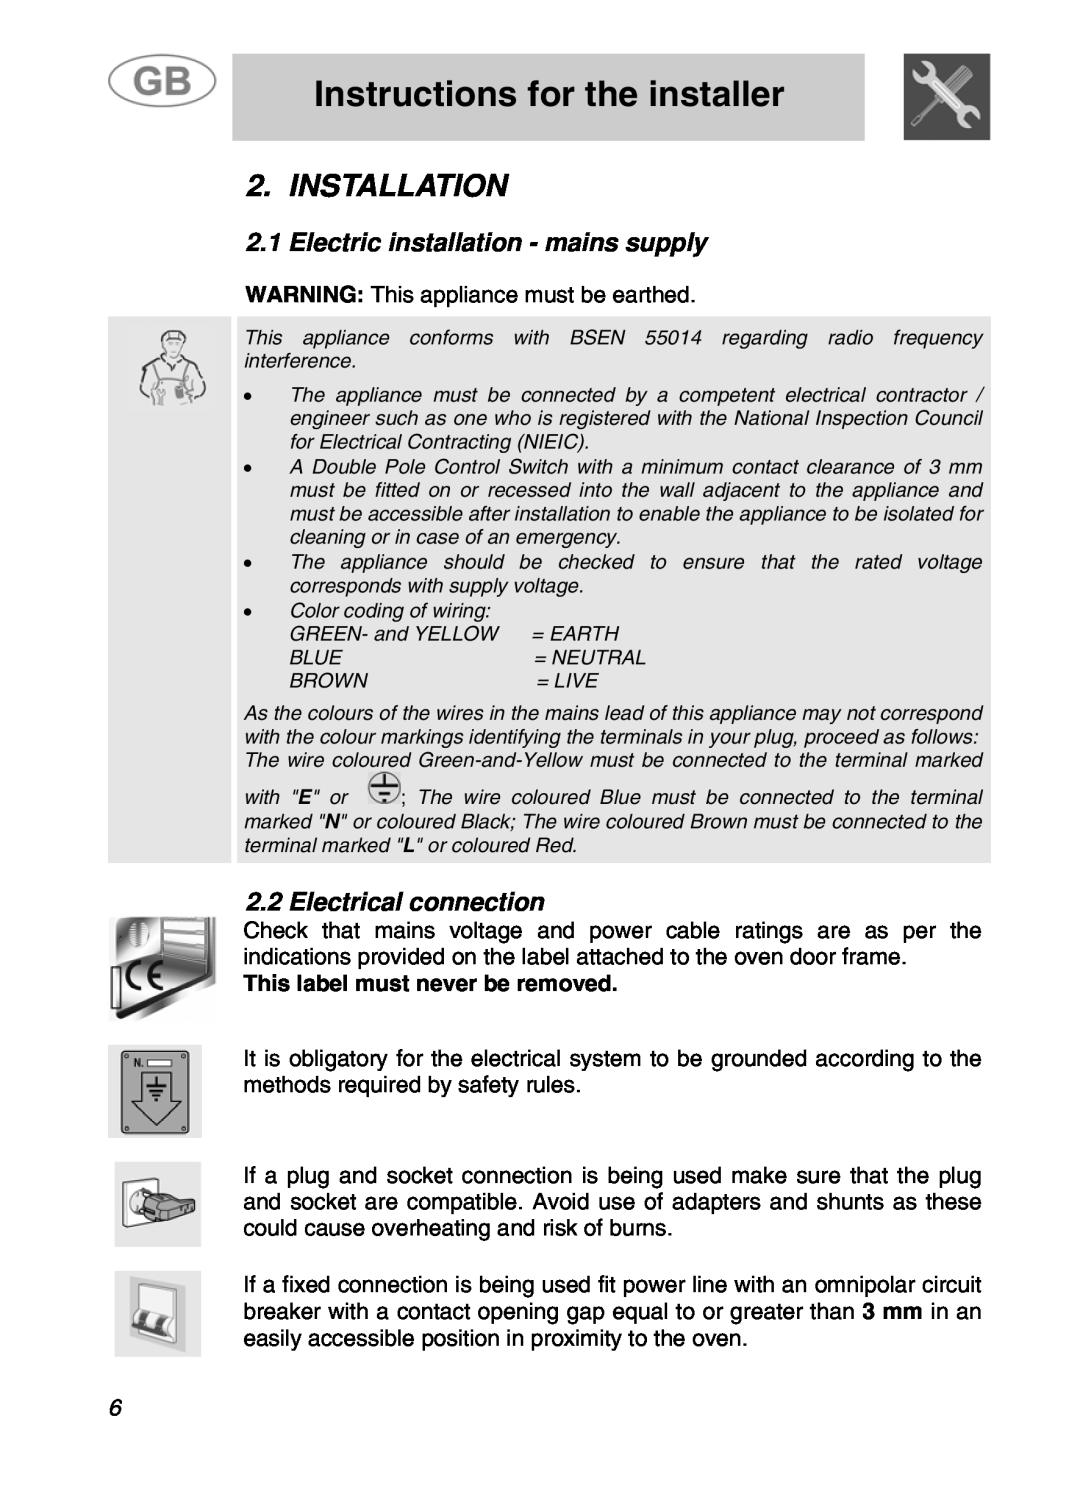 Smeg JRP30GIBB Instructions for the installer, Installation, Electric installation - mains supply, Electrical connection 